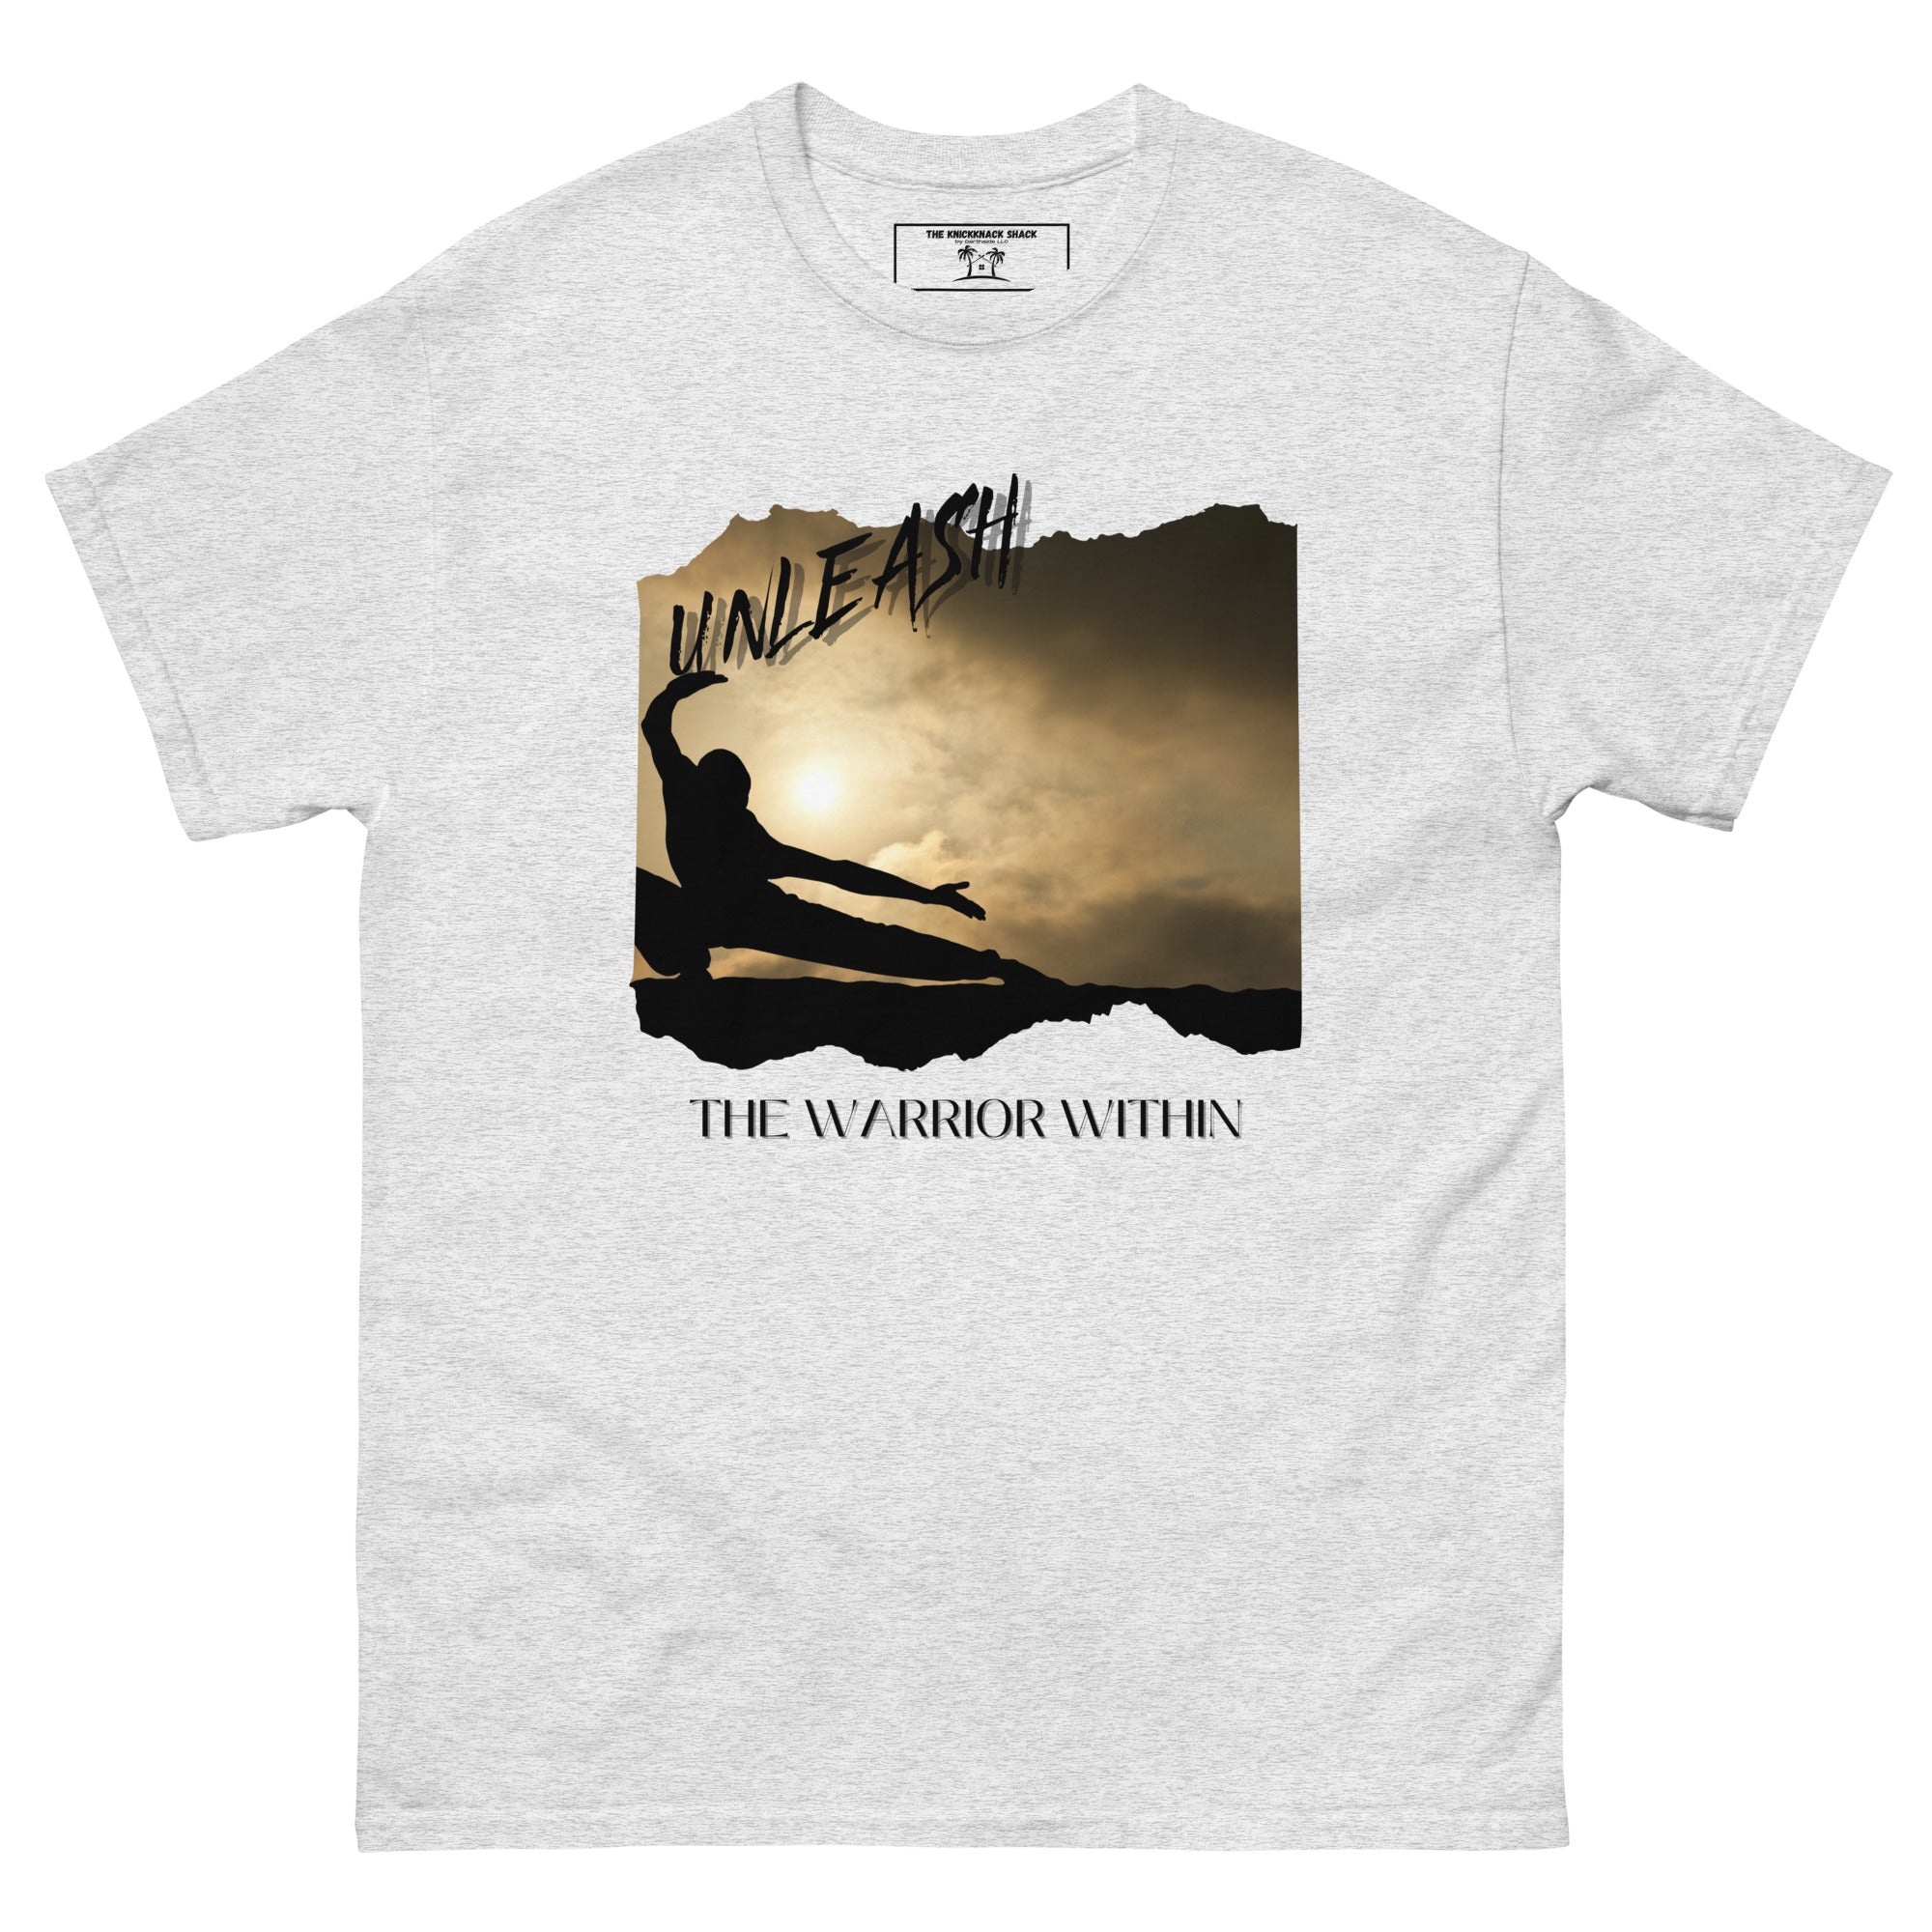 Classic Tee - Warrior Within 4 (Light Colors)